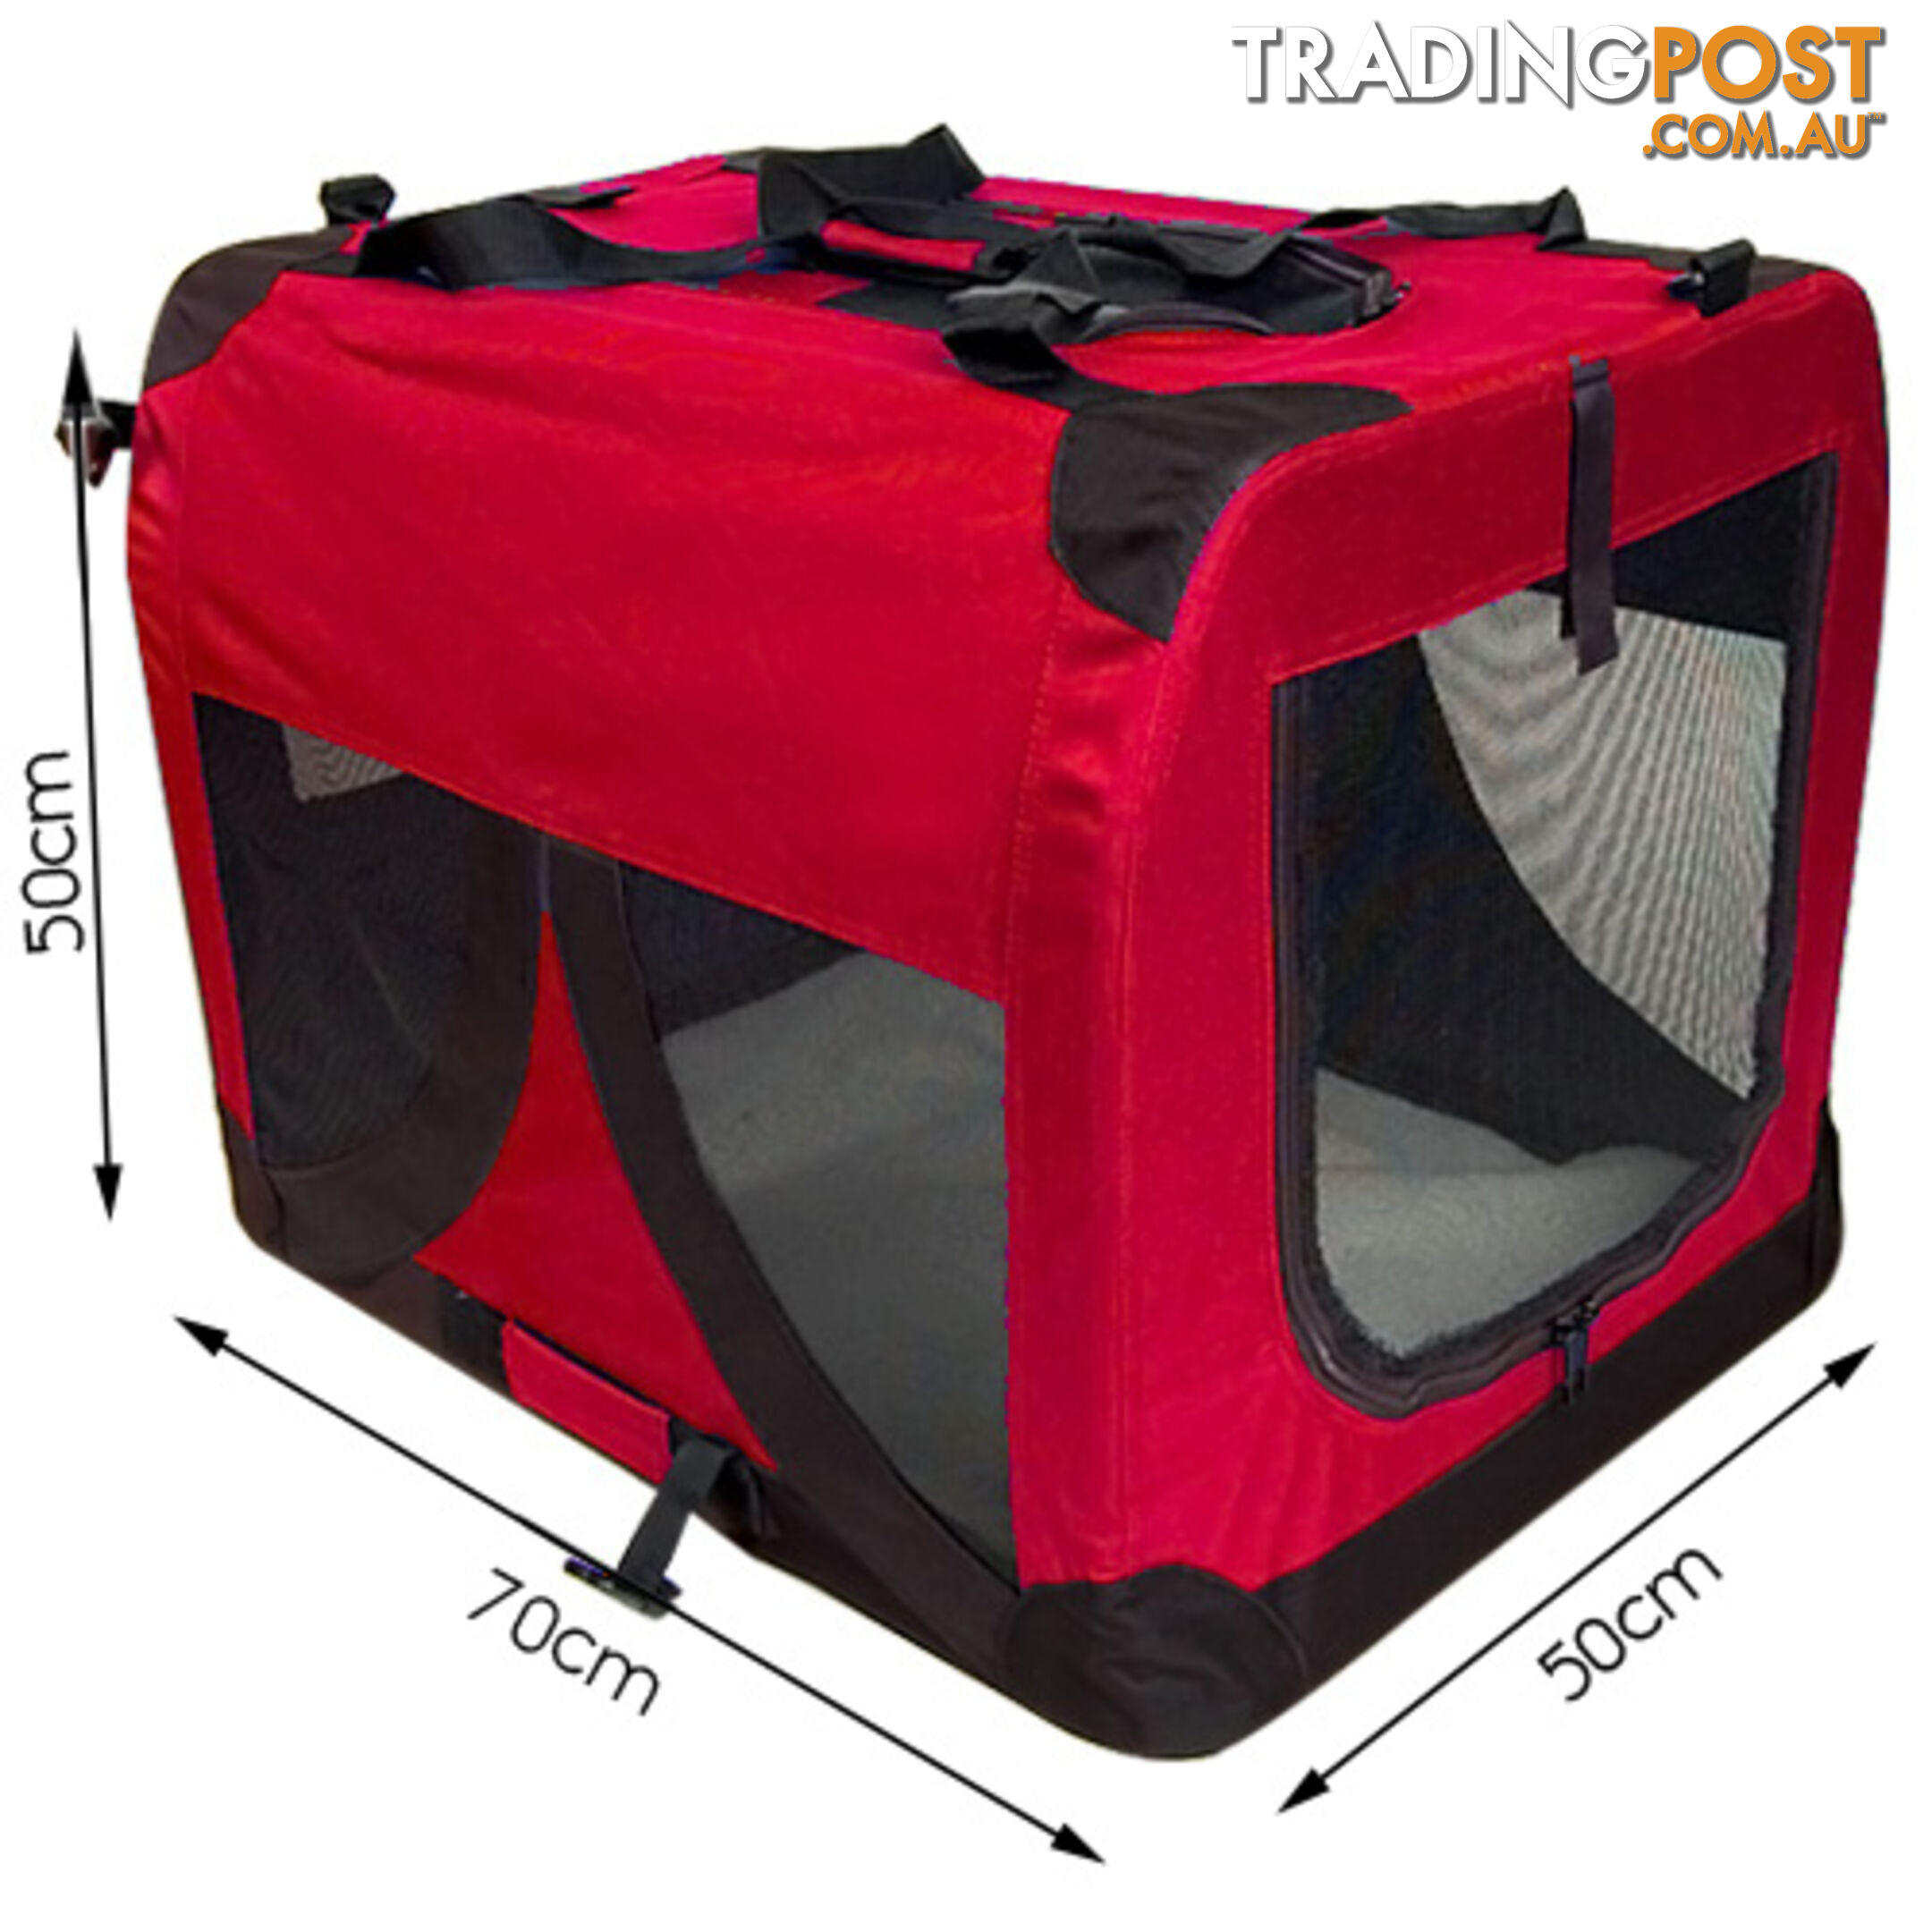 Large Portable Soft Pet Dog Crate Cage Kennel Red